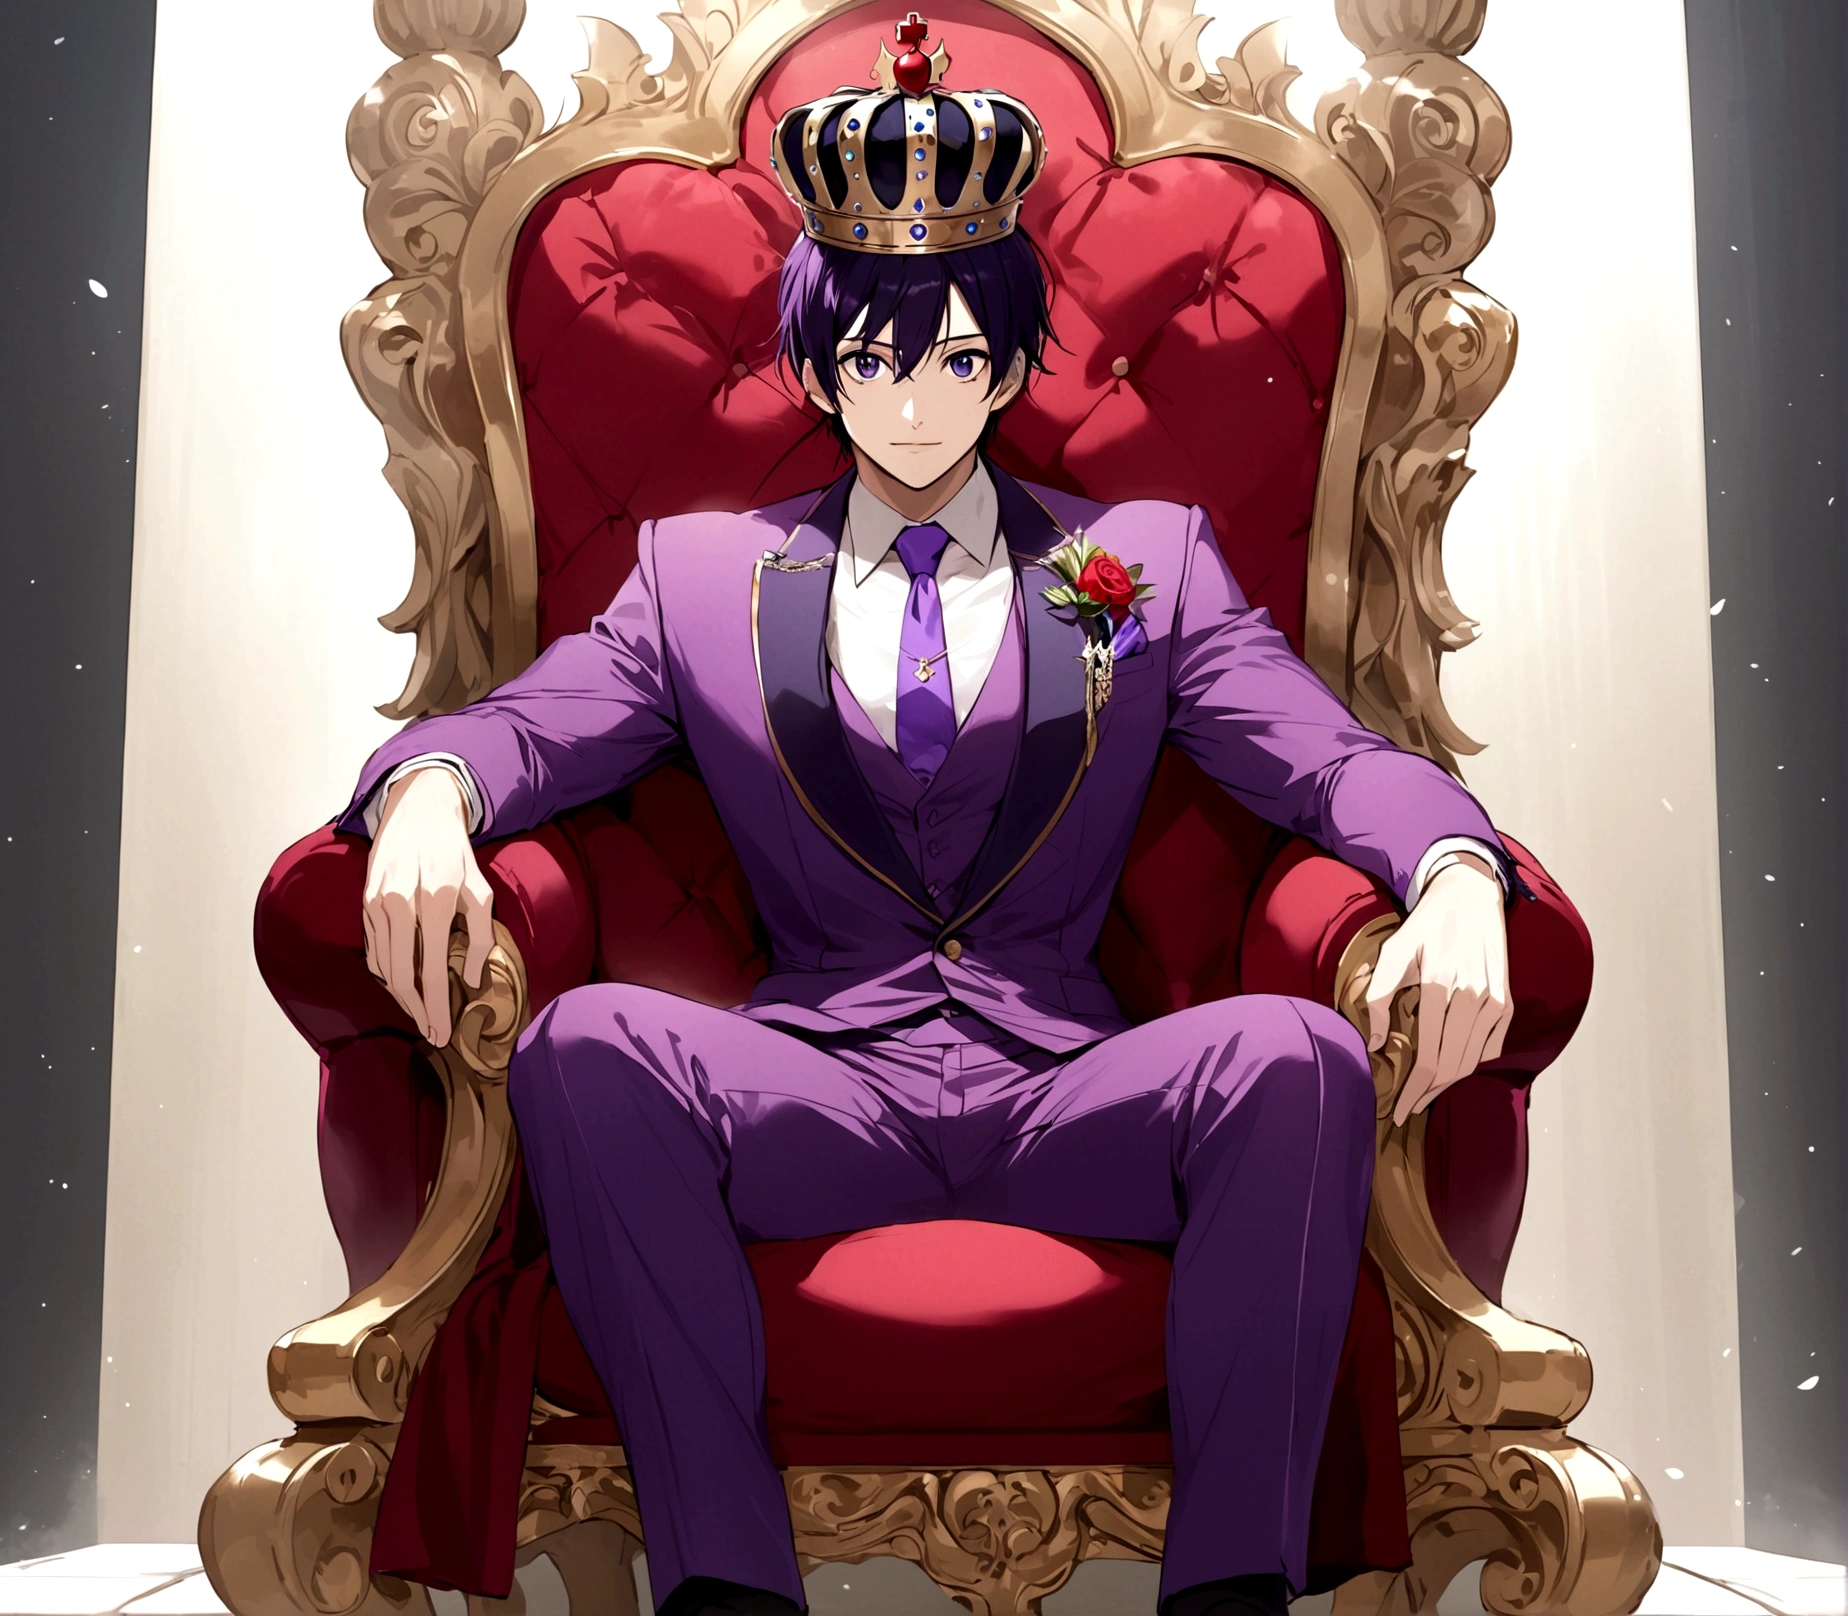 man, Red and purple suit, host, With a crown, Sitting on the throne